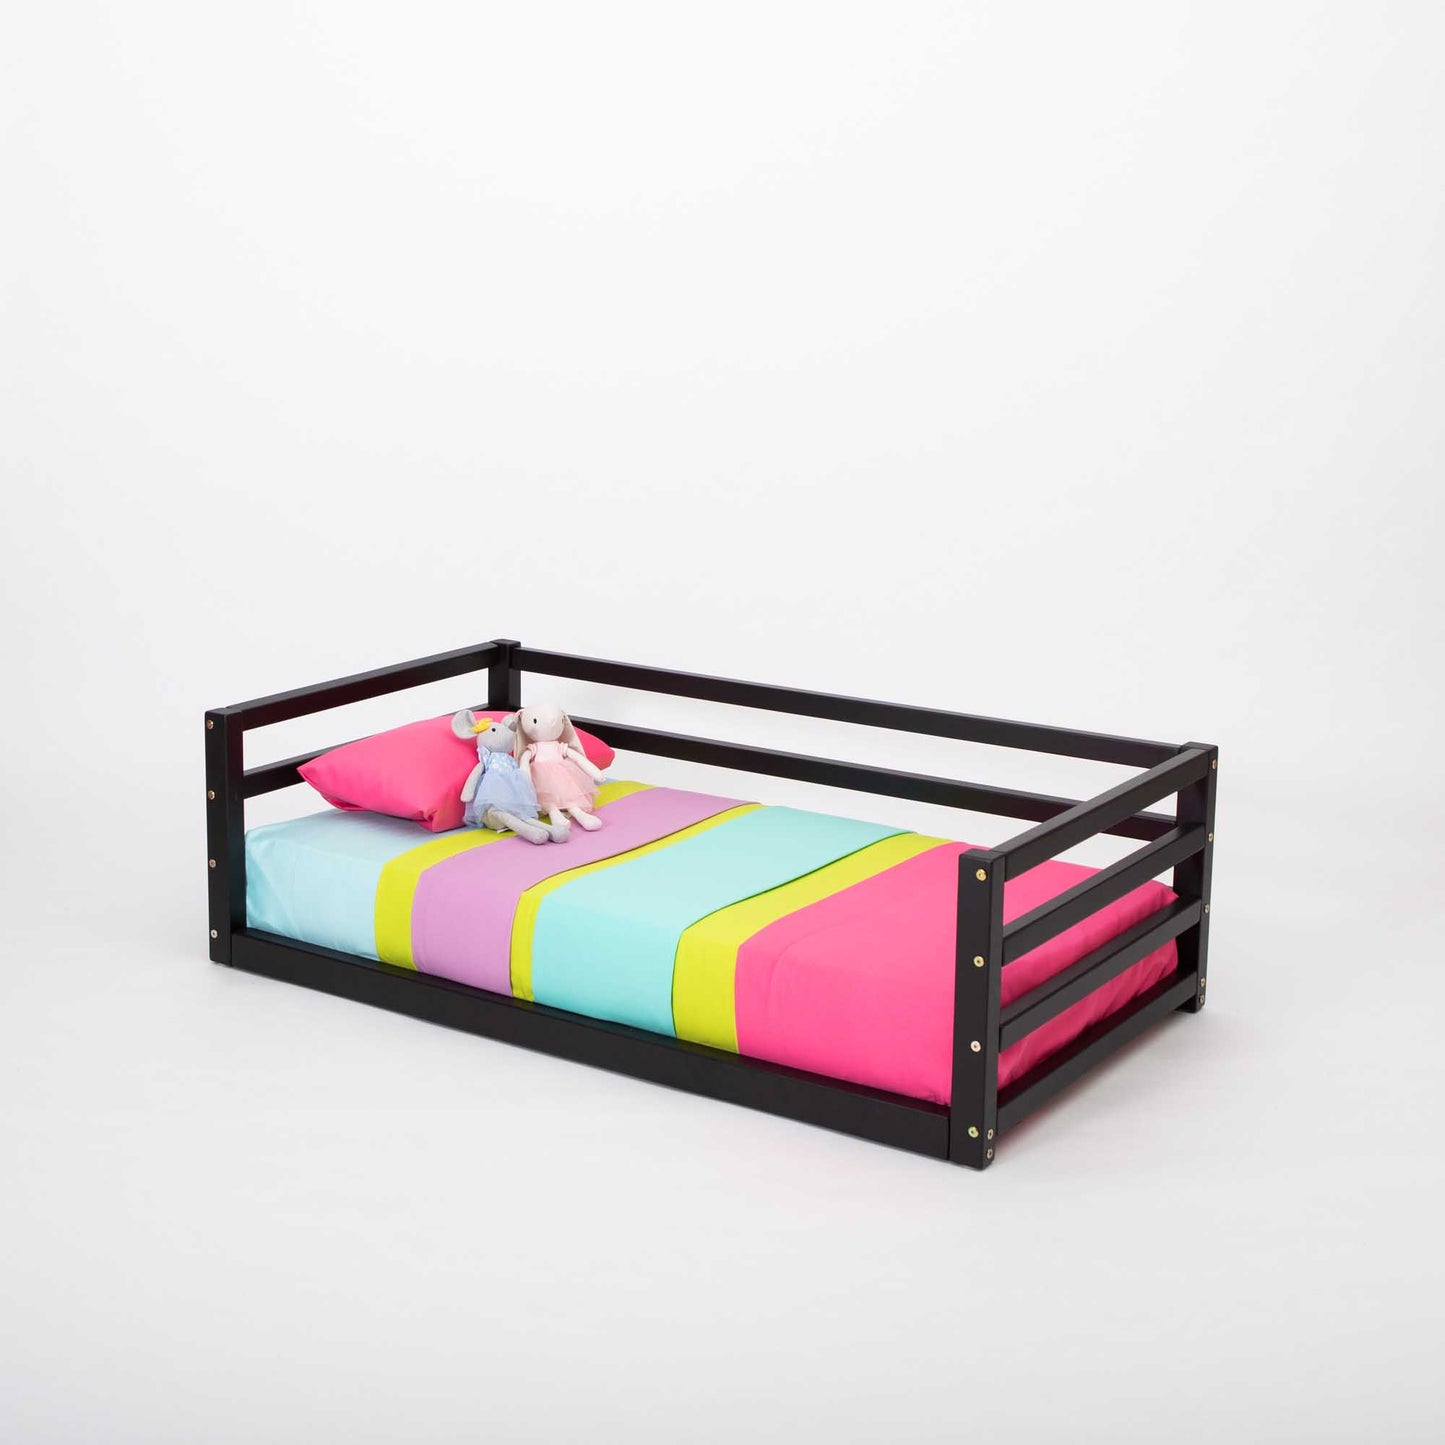 A Sweet Home From Wood children's floor level bed with colorful sheets and a black frame equipped with a 3-sided safety rail for transitional use.